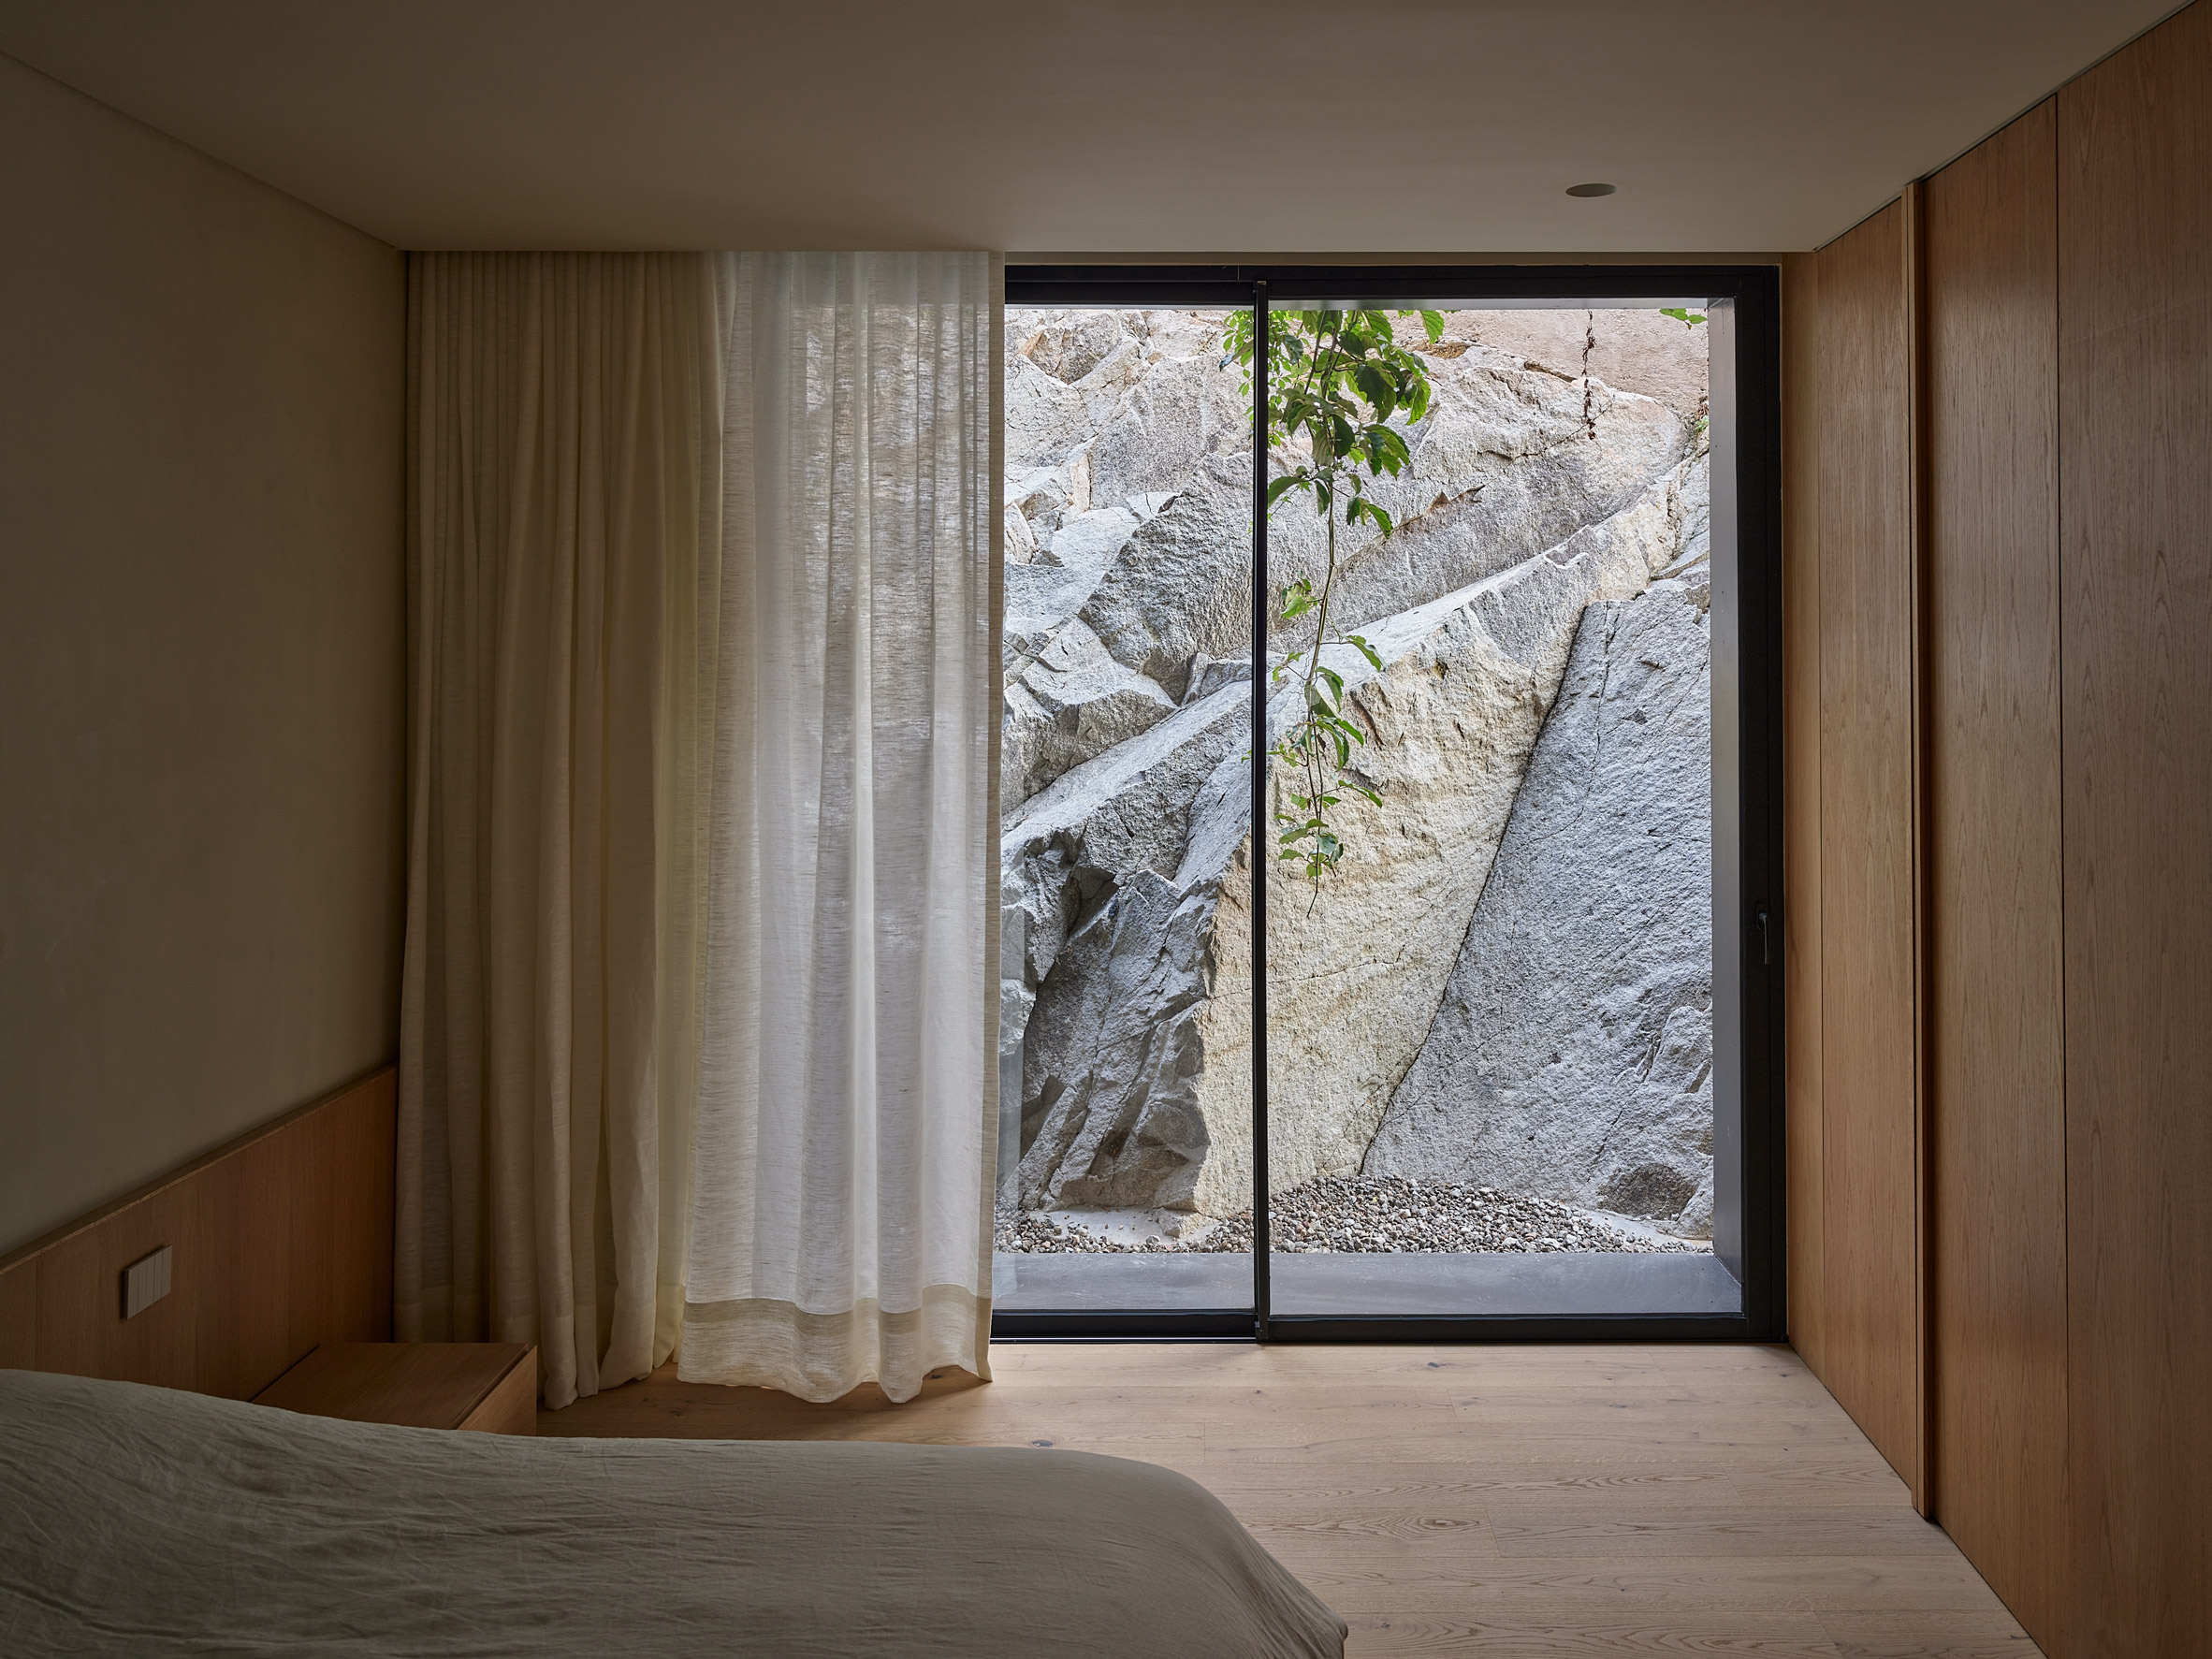 Warm-toned bedroom with timber wardrobe and floor-to-ceiling windows looking onto rocky terrain